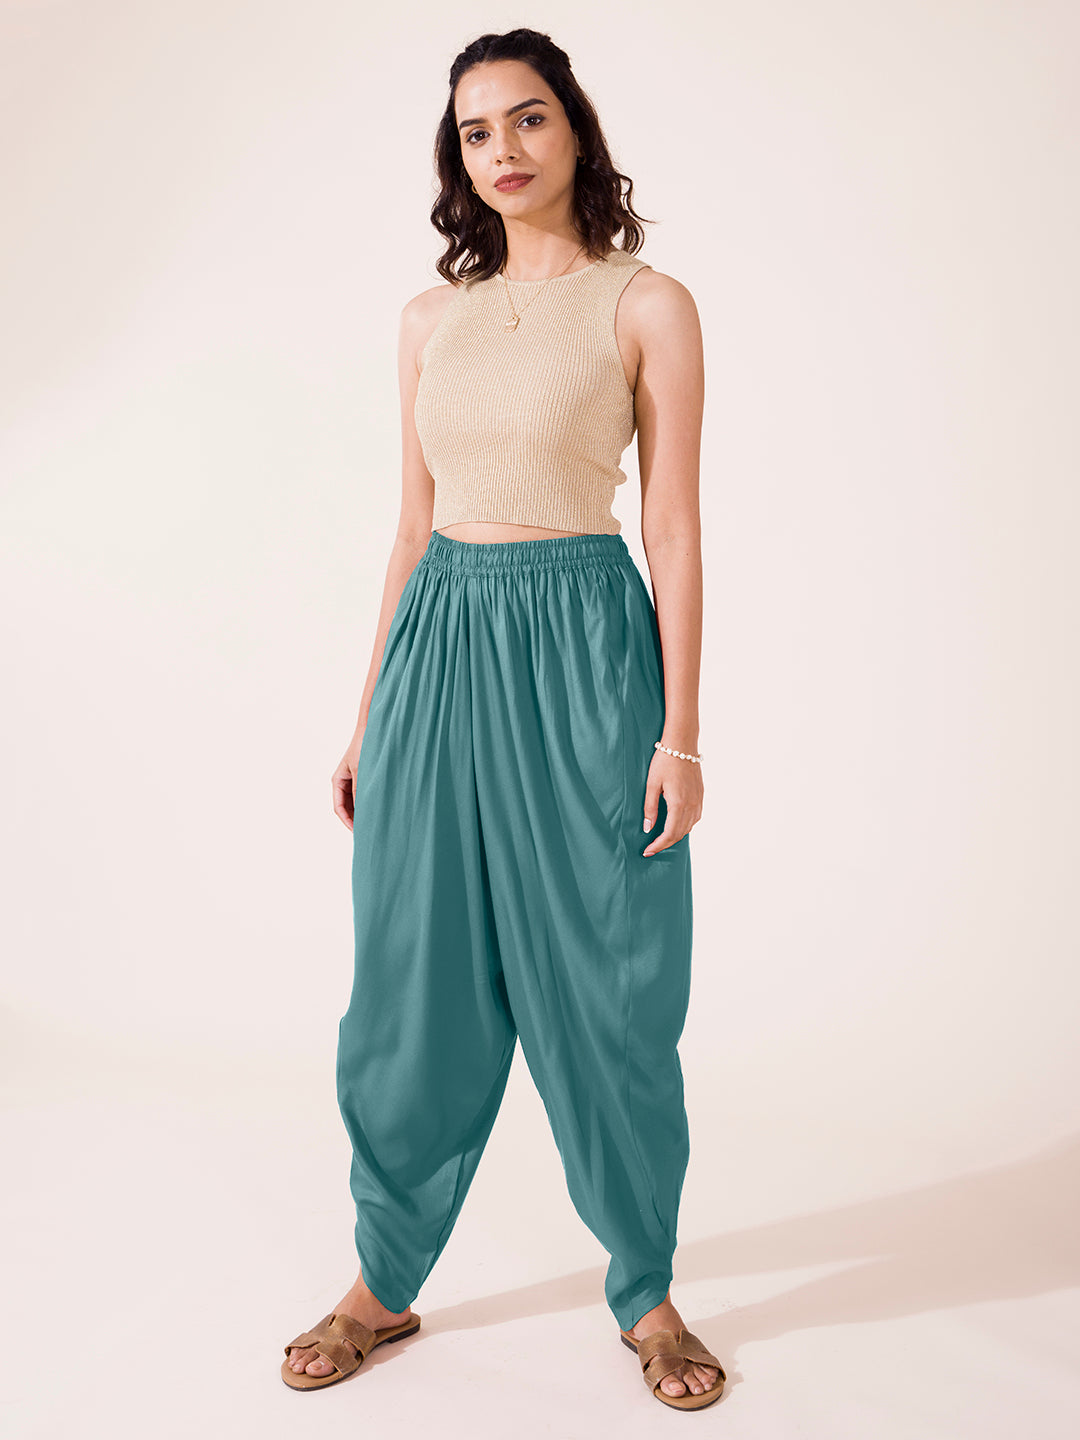 Buy TNQ Rayon Full Length Free Size Dhoti Pants Salwar For Women (Combo  Pack of 2) (White.Dark Green, Free Size) Online In India At Discounted  Prices